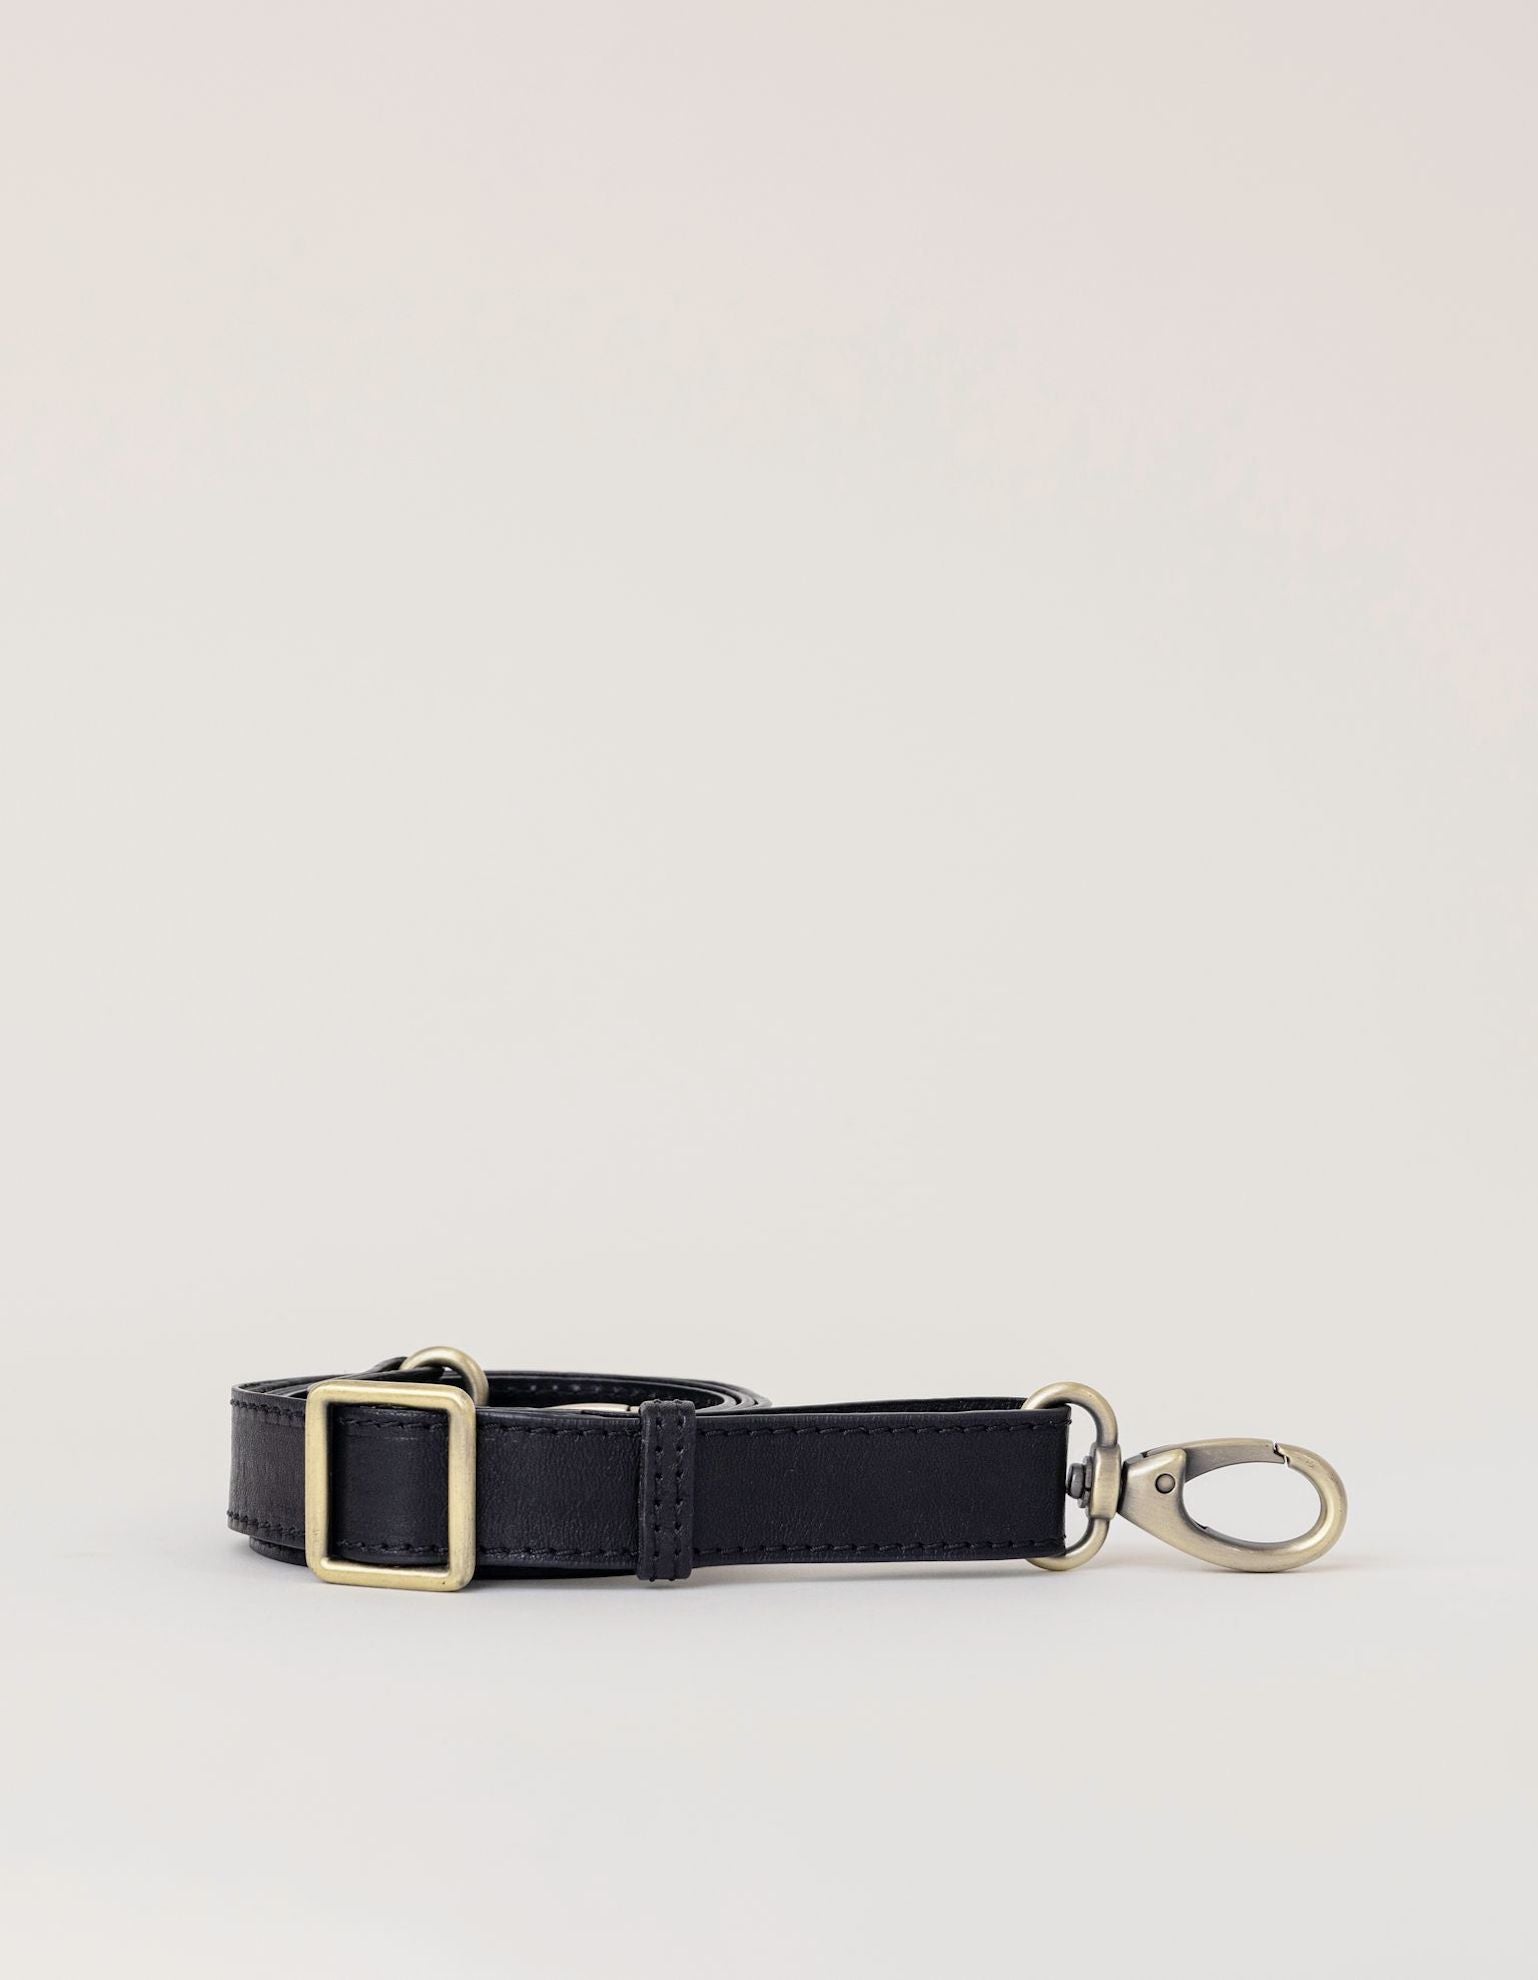 Bum Bag Strap in Black Stromboli Leather. Front product image.